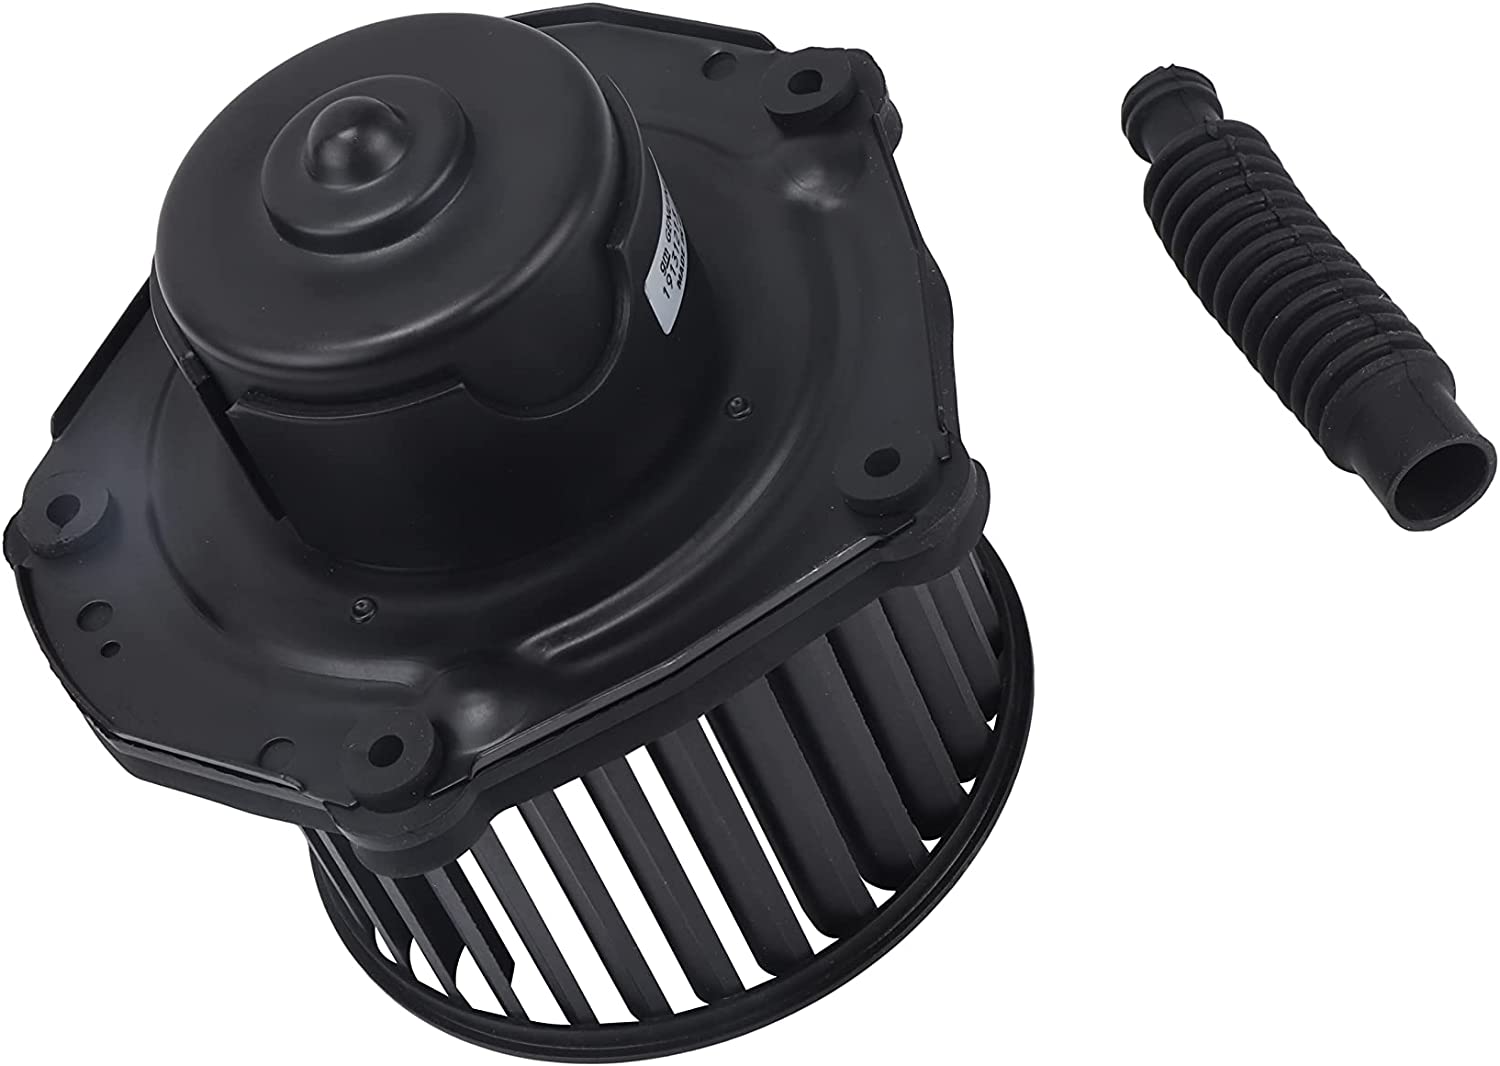 ACDelco GM Genuine Parts 15-80665 Heating and Air Conditioning Blower Motor with Wheel Fits select: 1997-2000 CHEVROLET GMT-400, 1997-1999 CHEVROLET TAHOE - image 2 of 2